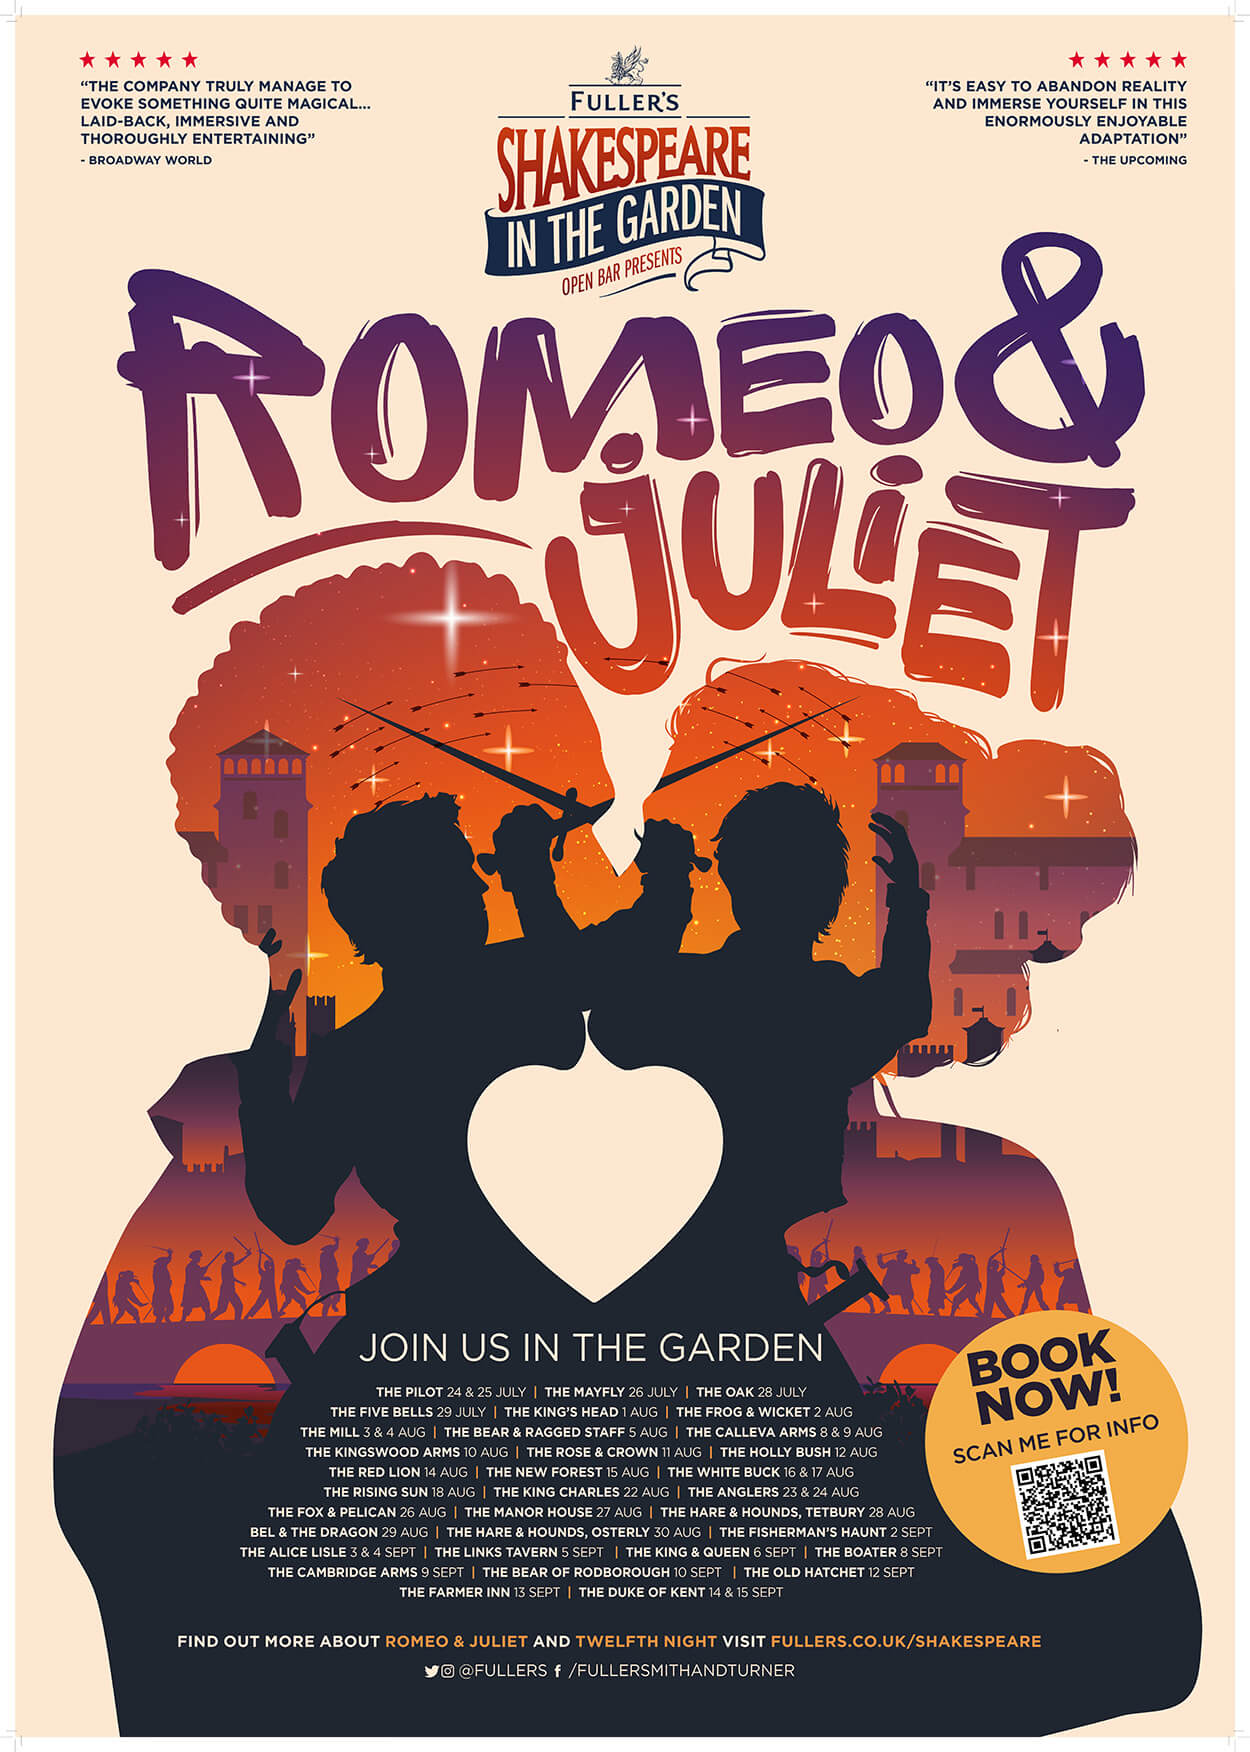 Poster for Romeo and Juliet. The outlines of two lovers kiss. The necks form the silhouette of a heart.